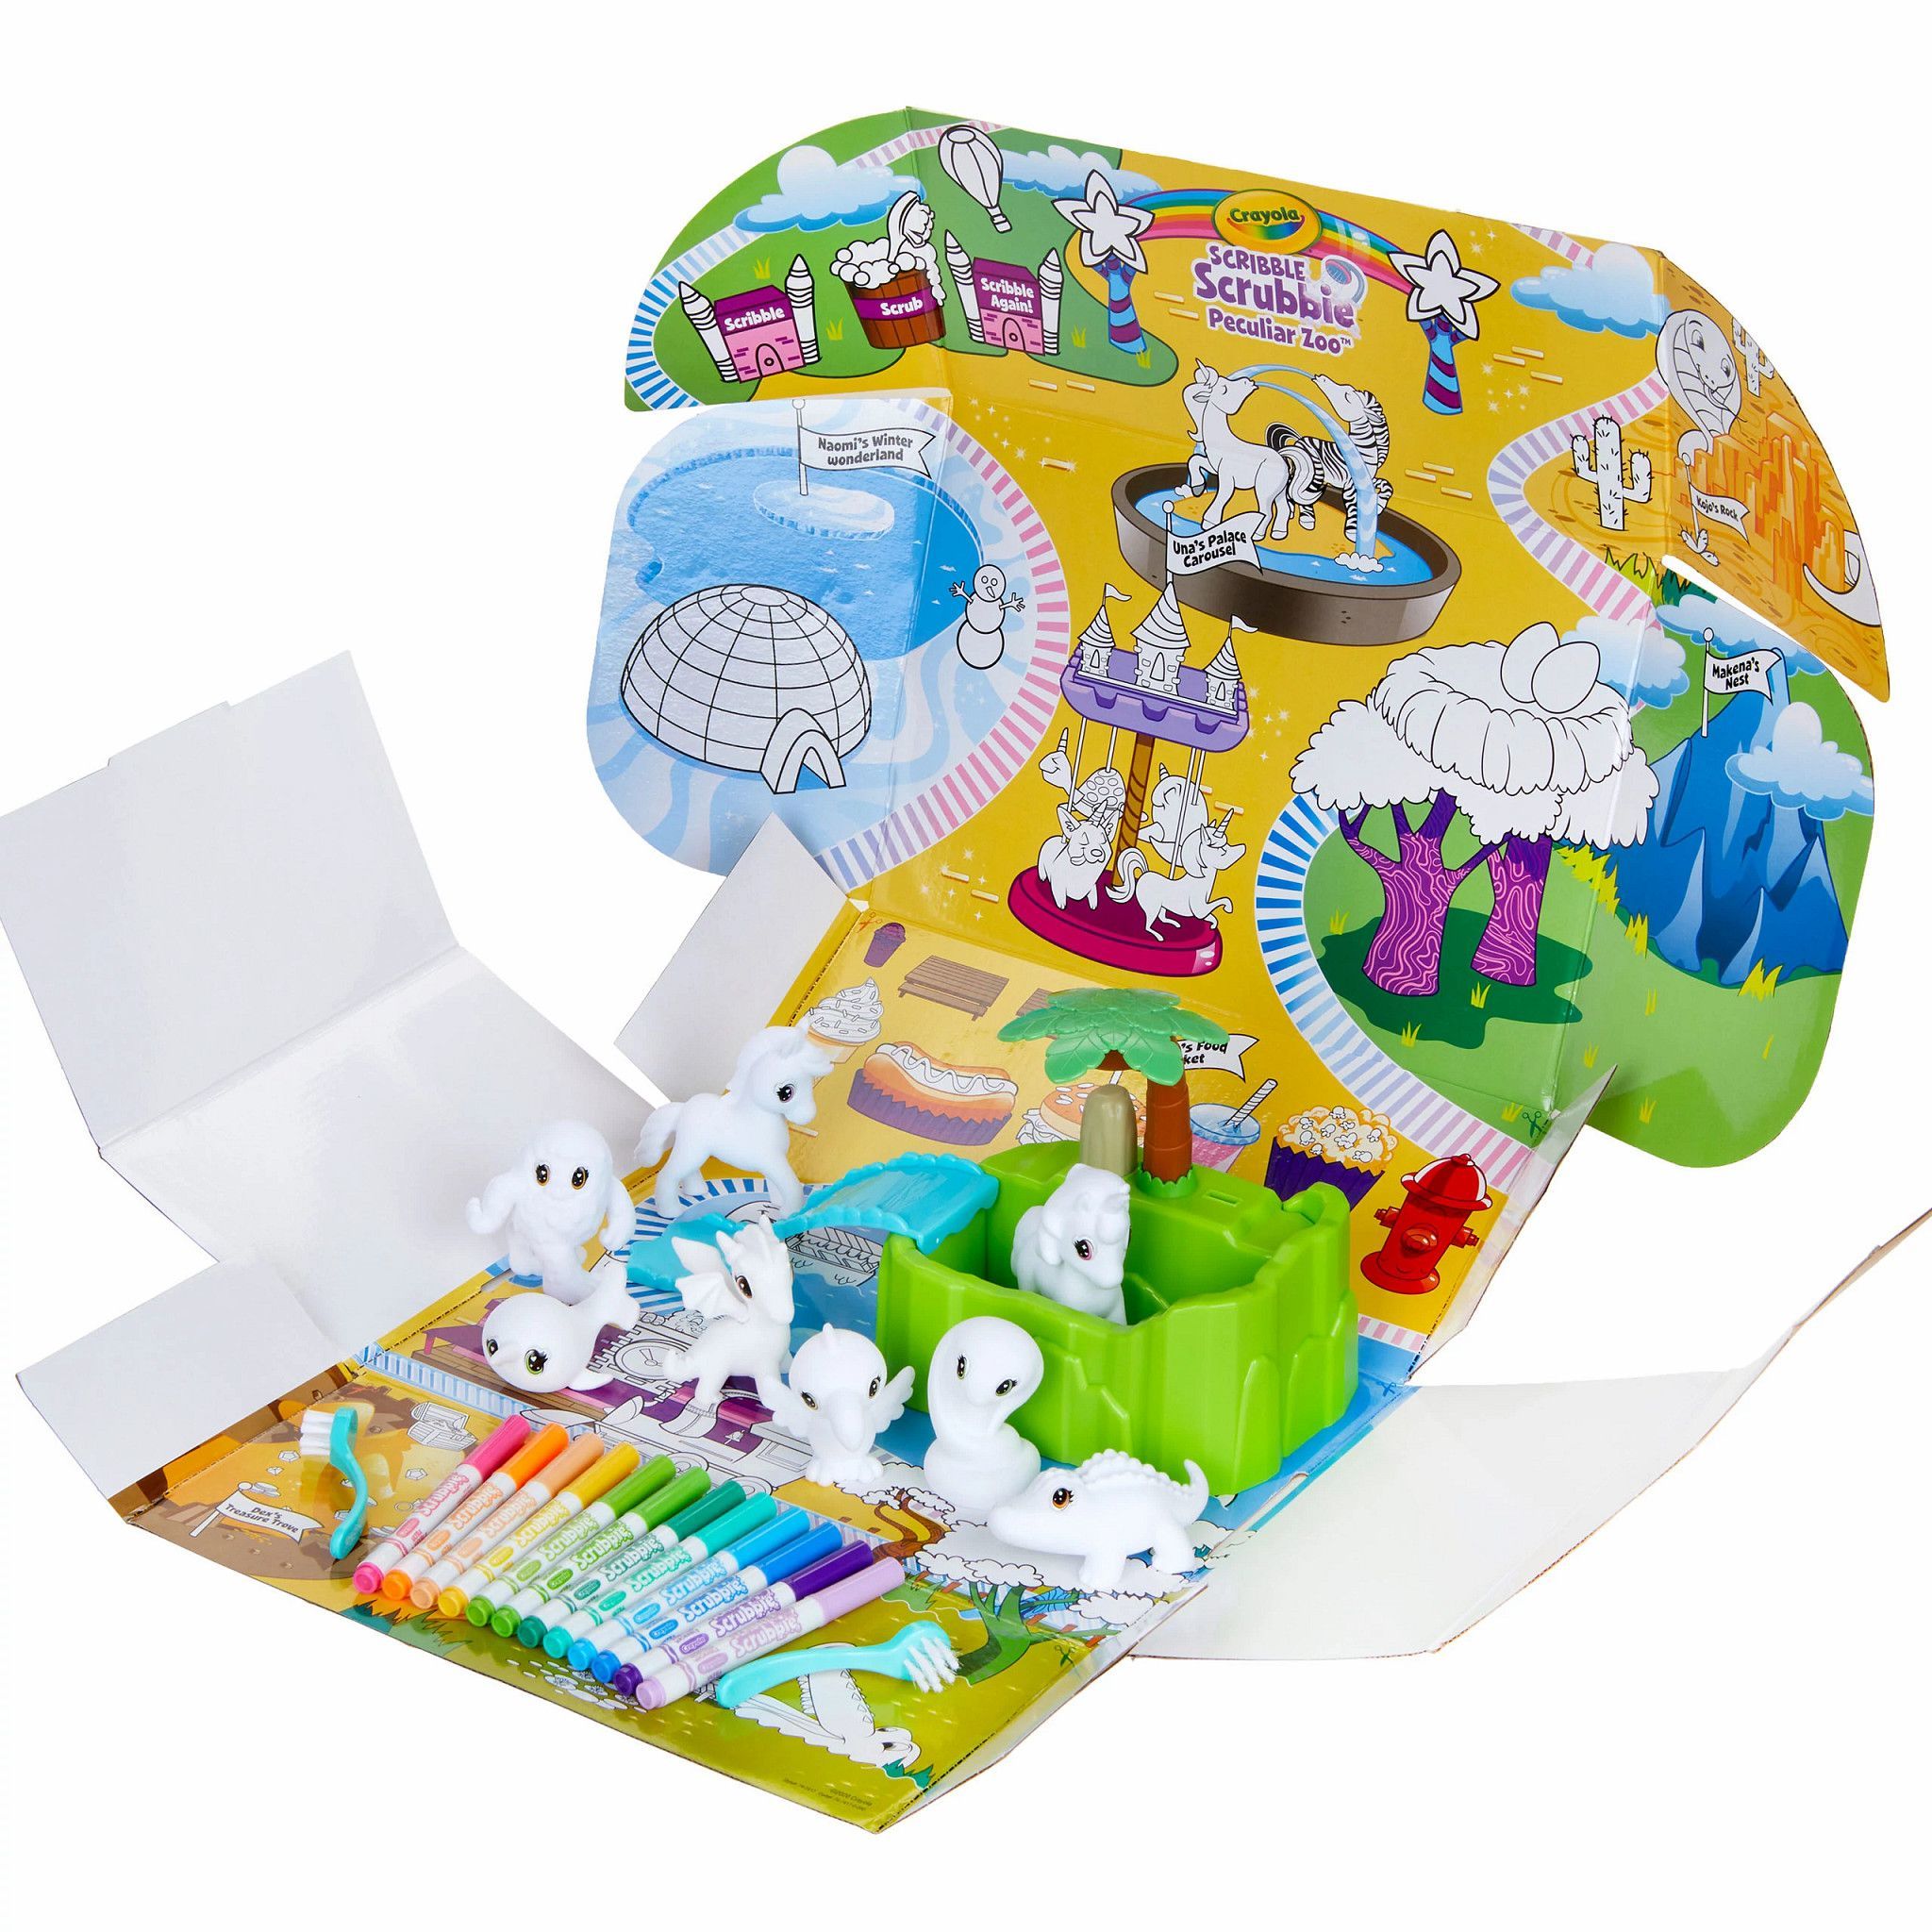 Crayola Scribble Scrubbie Peculiar Zoo Mess Free Playset, Creative Toys, Gift for Beginner Child - image 1 of 9